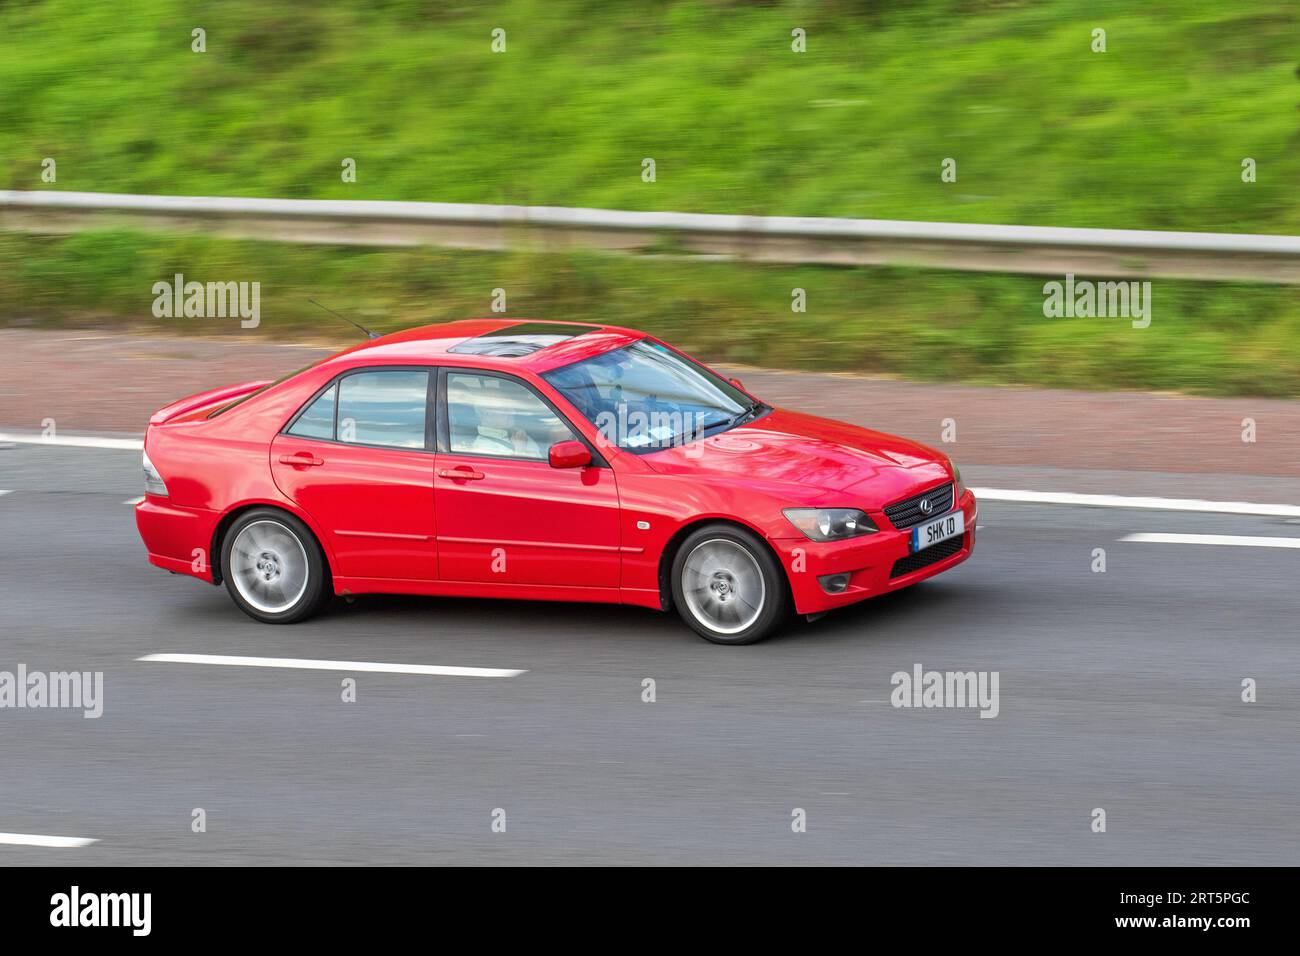 2005 Lexus Is200 Se Auto 200 VVT-I ECT-I Auto Red Car Saloon Petrol 1988 cc; travelling at speed on the M6 motorway in Greater Manchester, UK Stock Photo